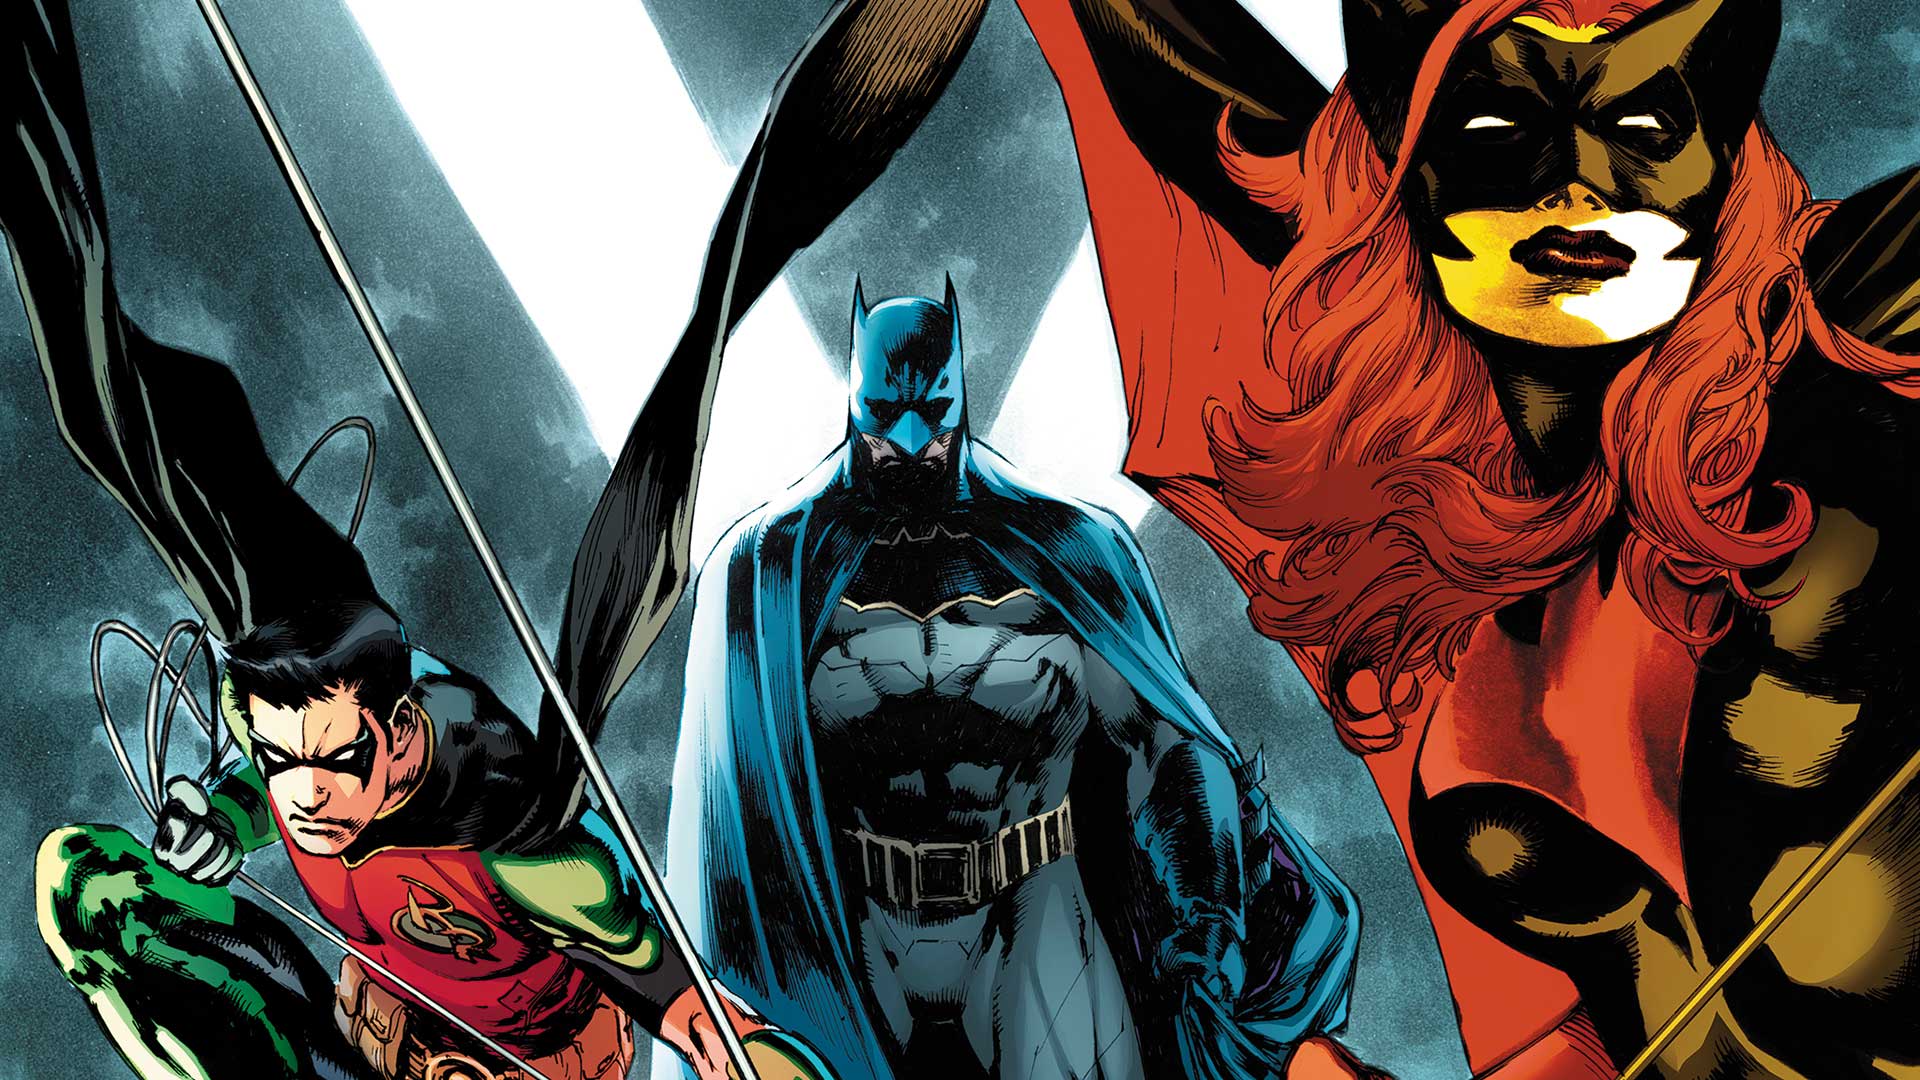 A fan favorite character comes back to life in 'Detective Comics' #981